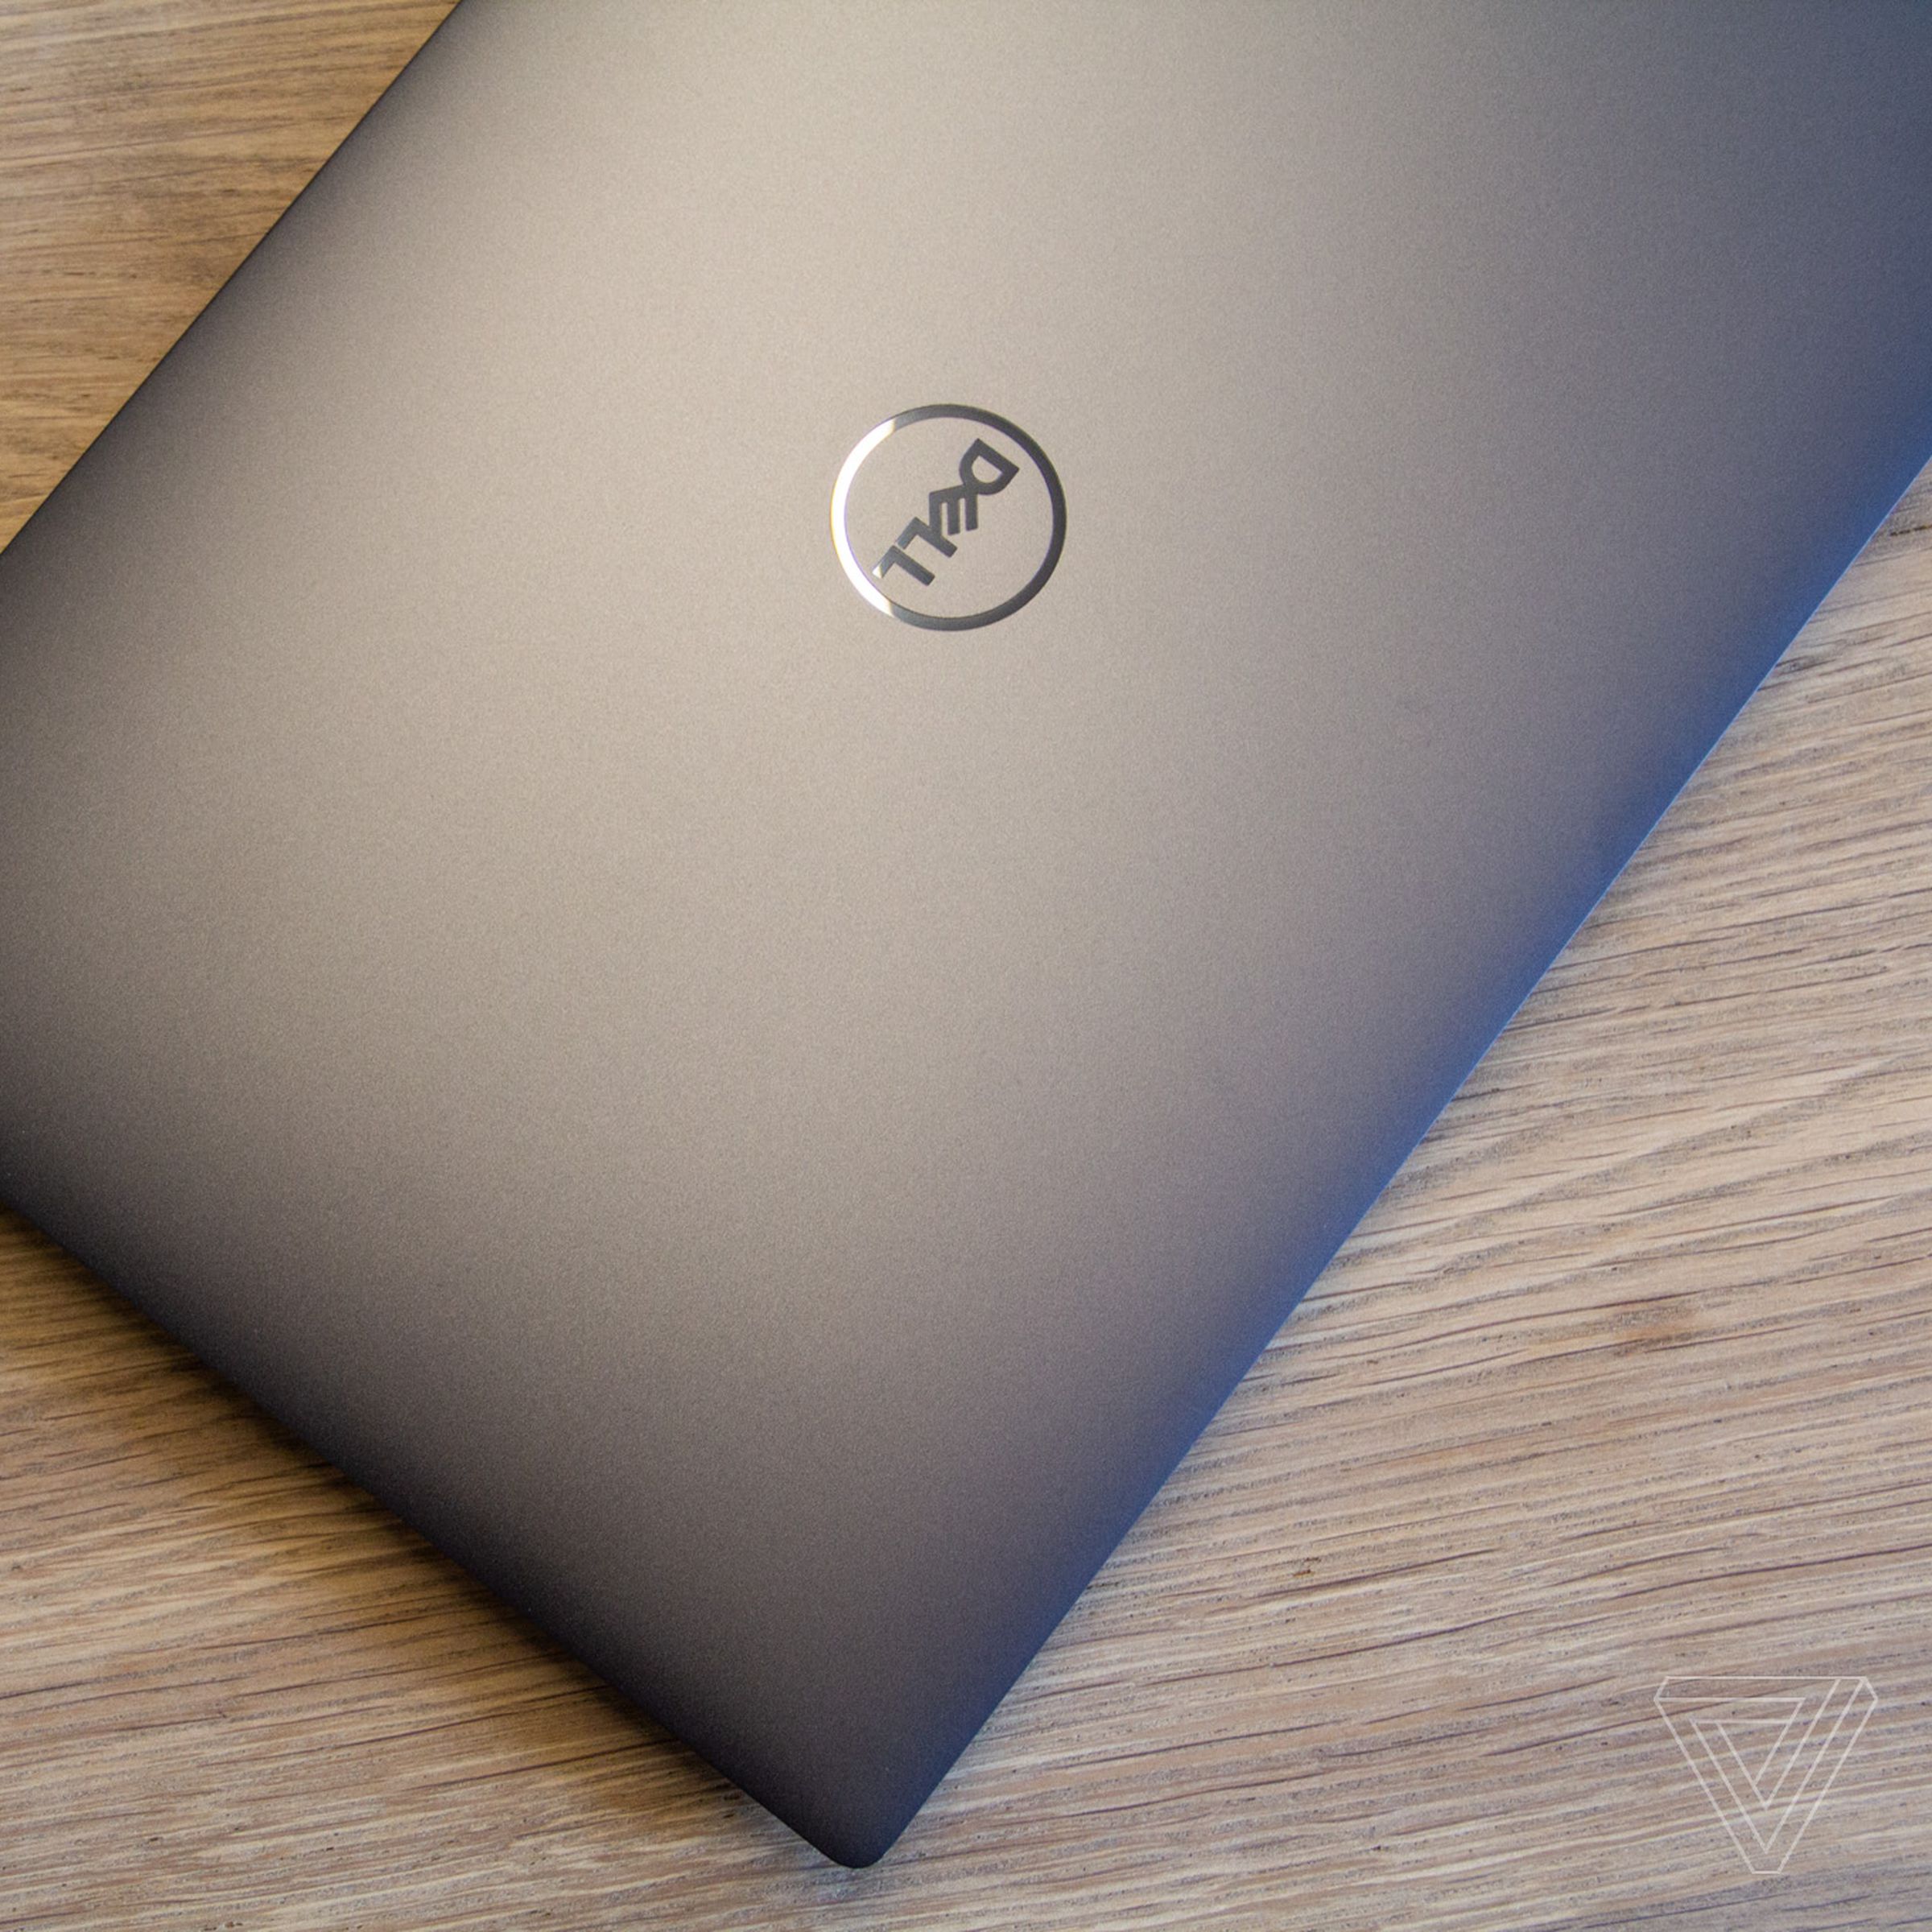 The lid of the Dell XPS 13 Plus on a wooden table seen from above.